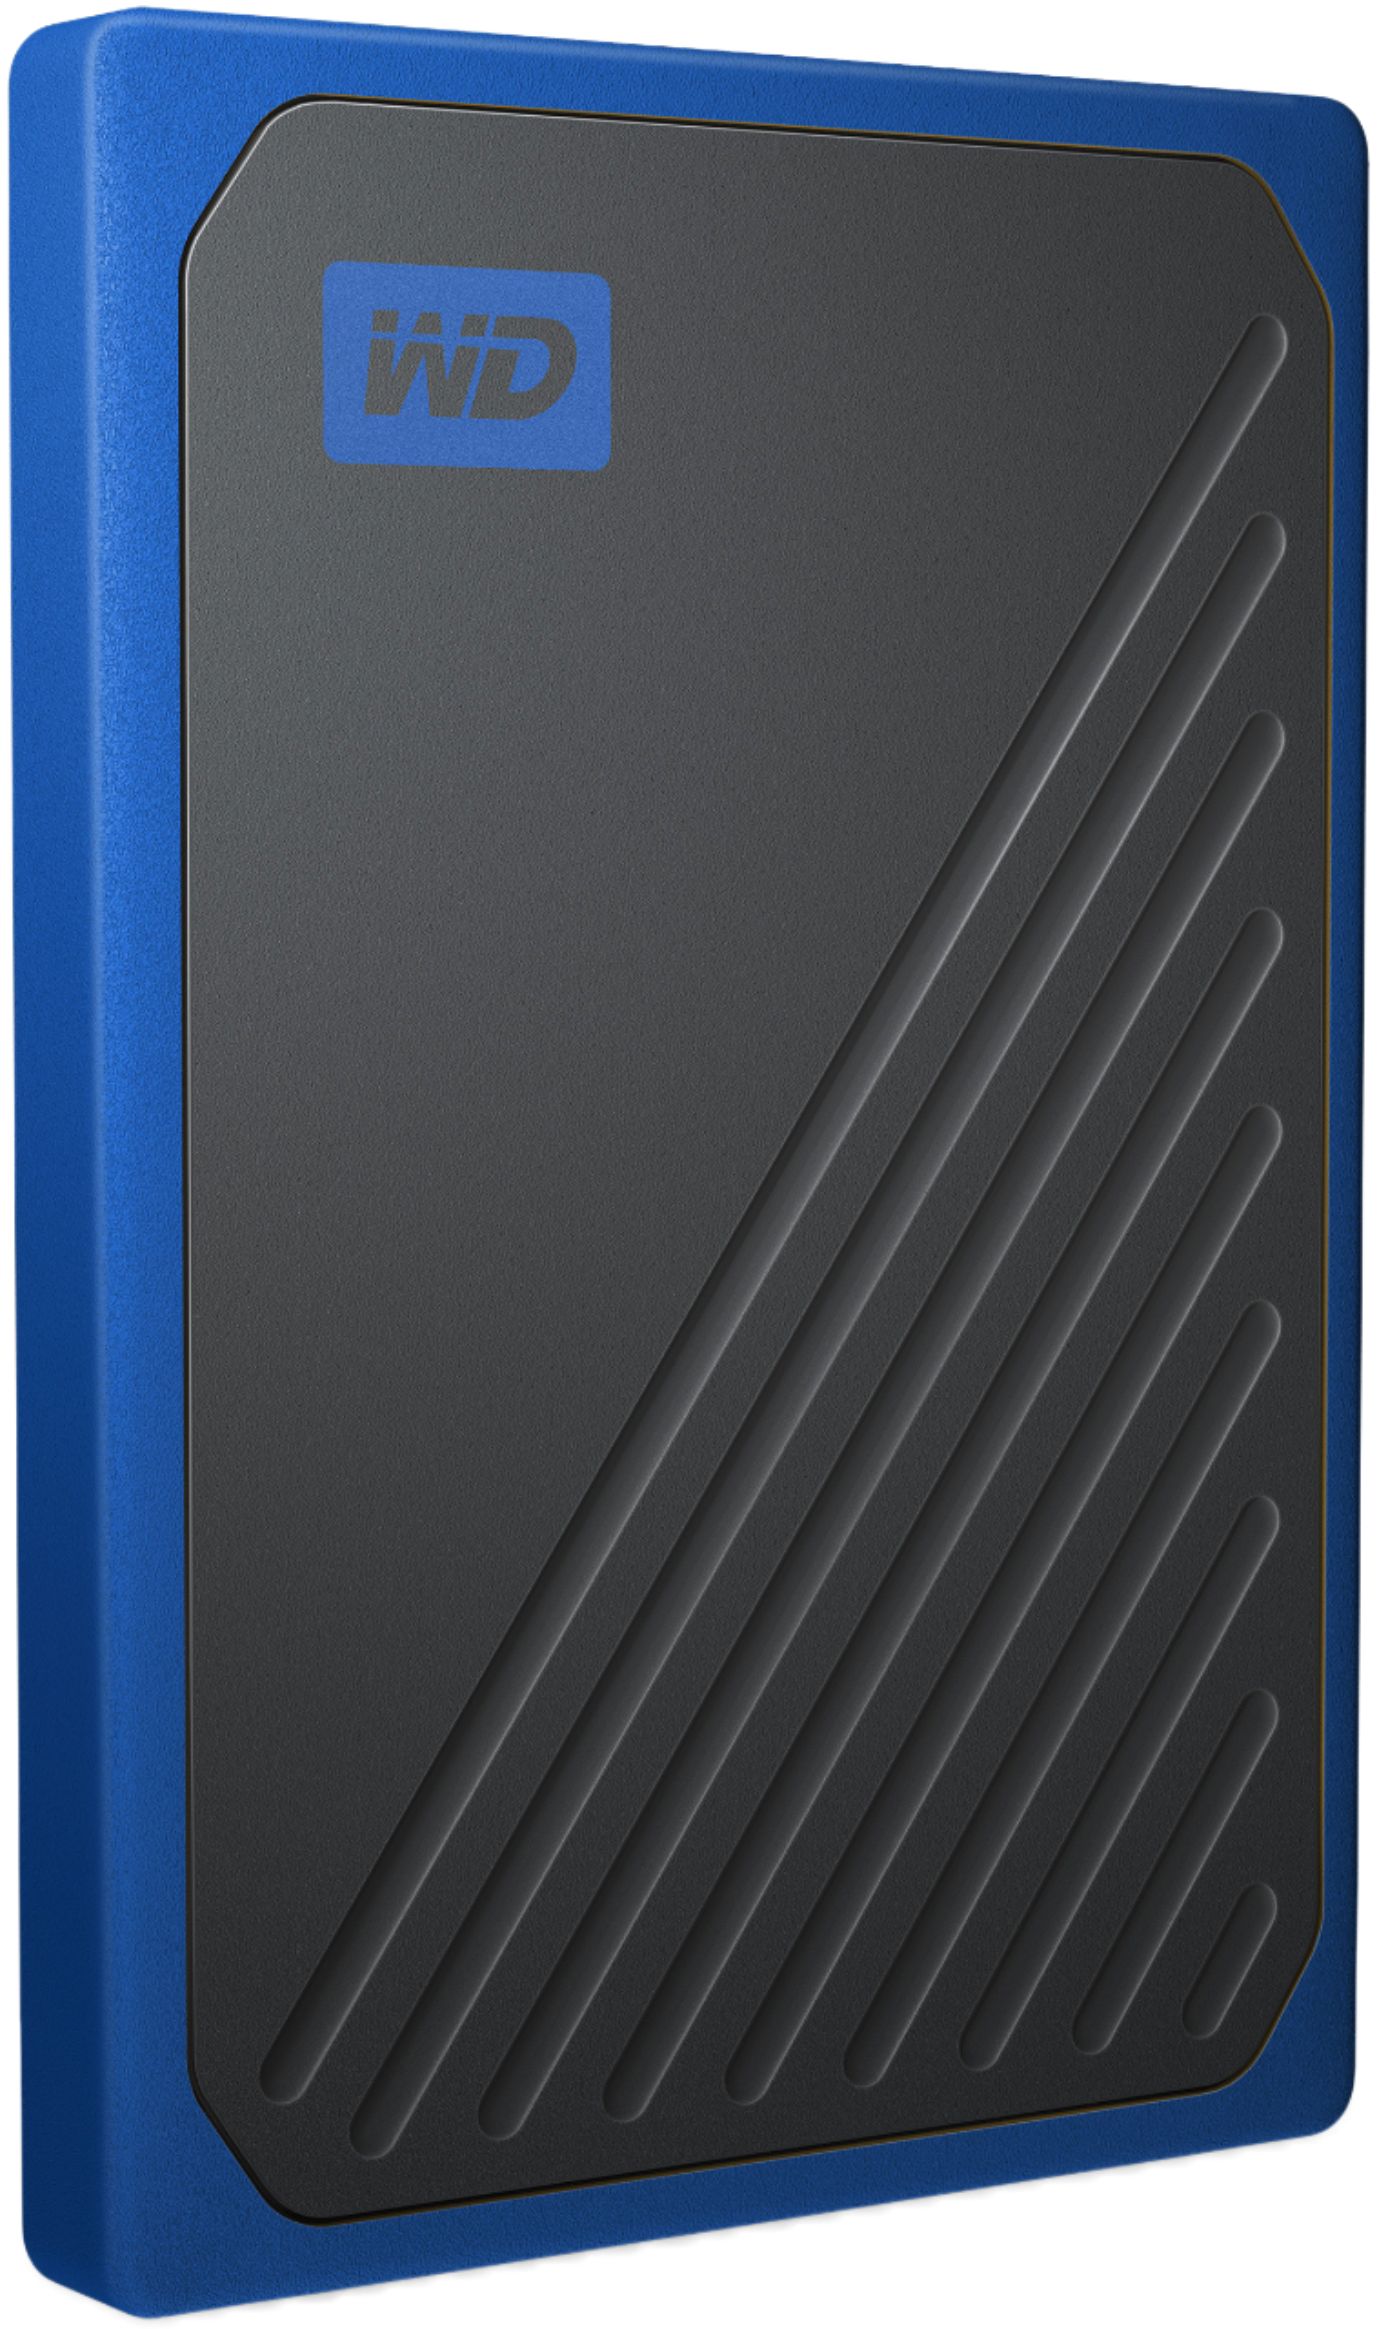 Angle View: PNY - 2TB Internal SATA Solid State Drive